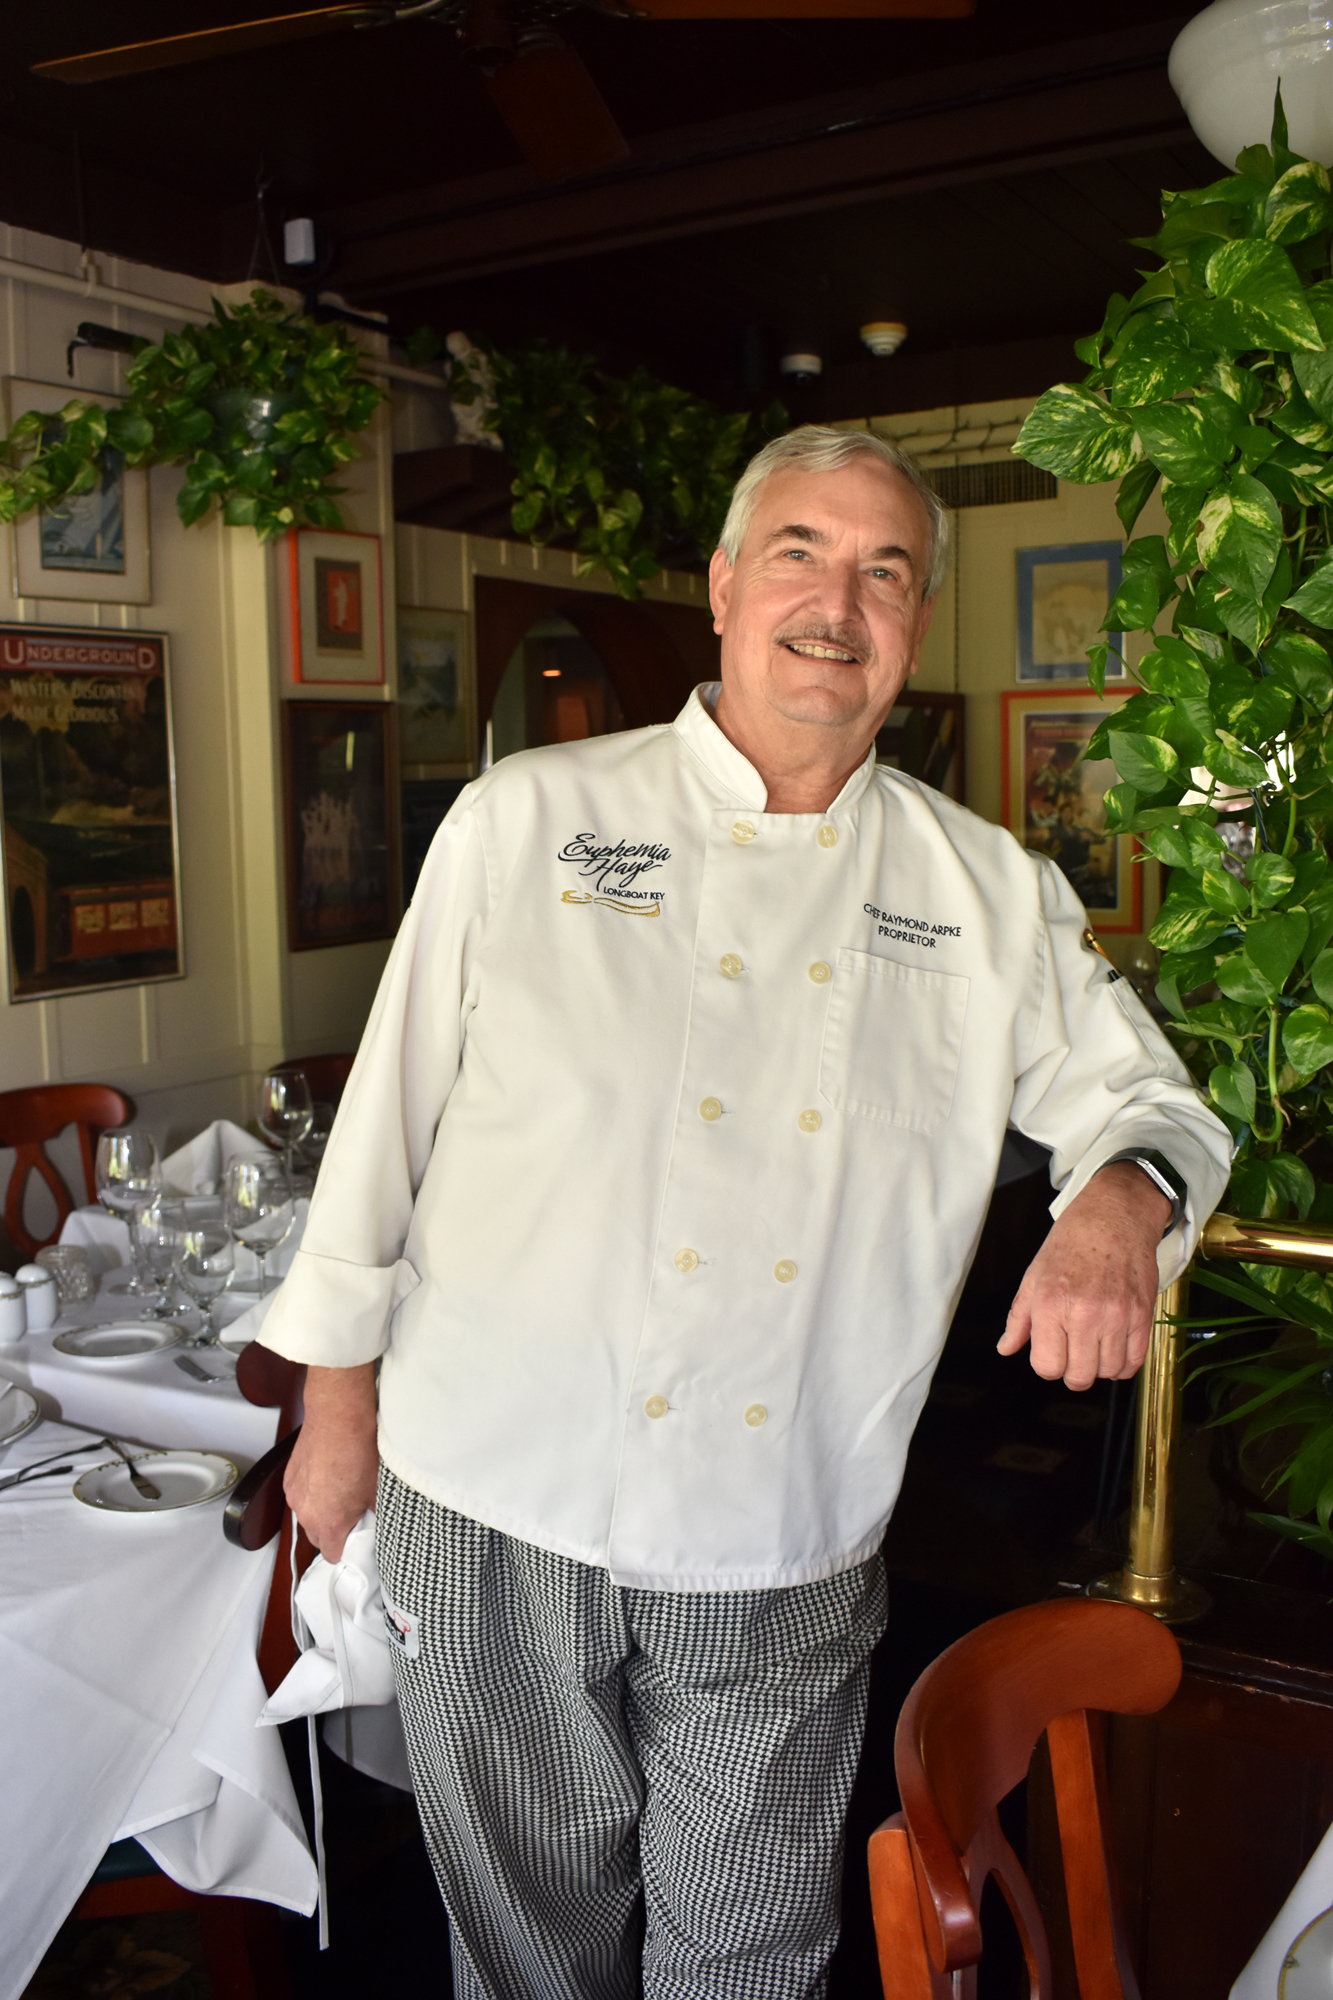 Euphemia Haye Chef Ray Arpke said Valentin's Day is one of the two most popular nights at the restaurant. The other is New Year's Eve.